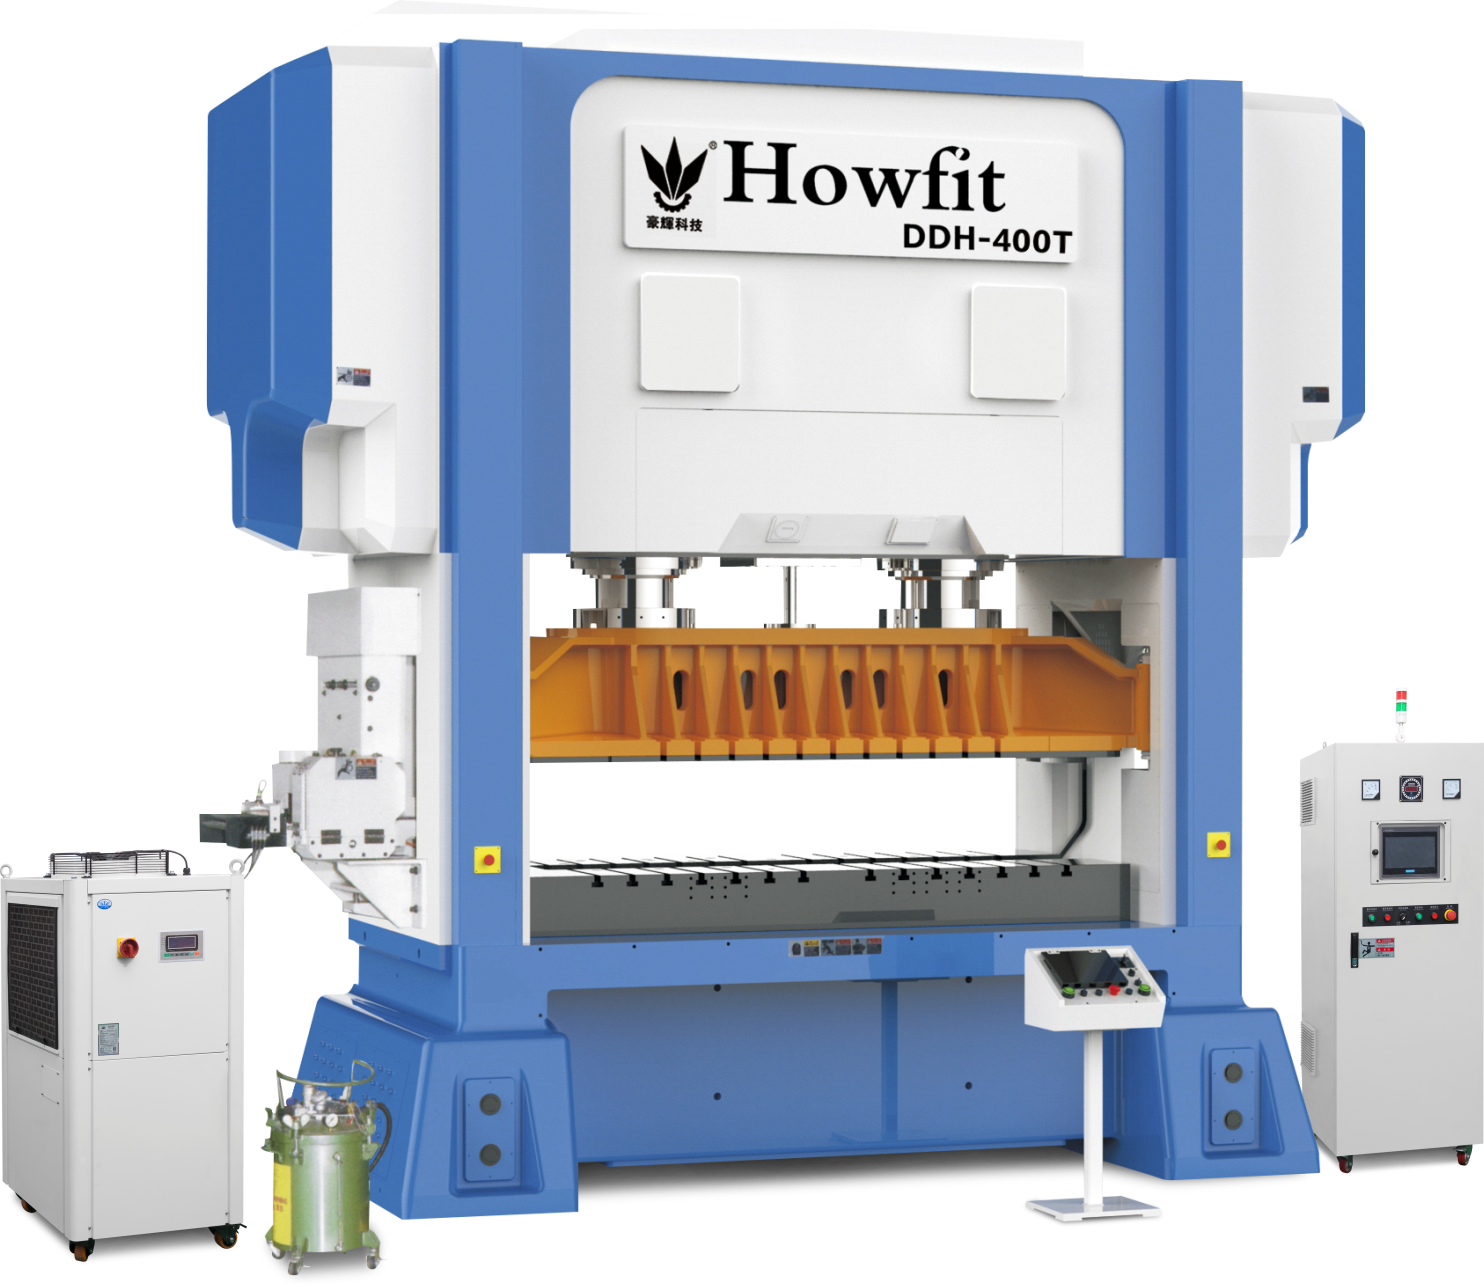 From an economic and financial point of view, discuss in detail the return on investment, use cost and maintenance of the gantry-type high-speed precision punching machine, as well as the market de...